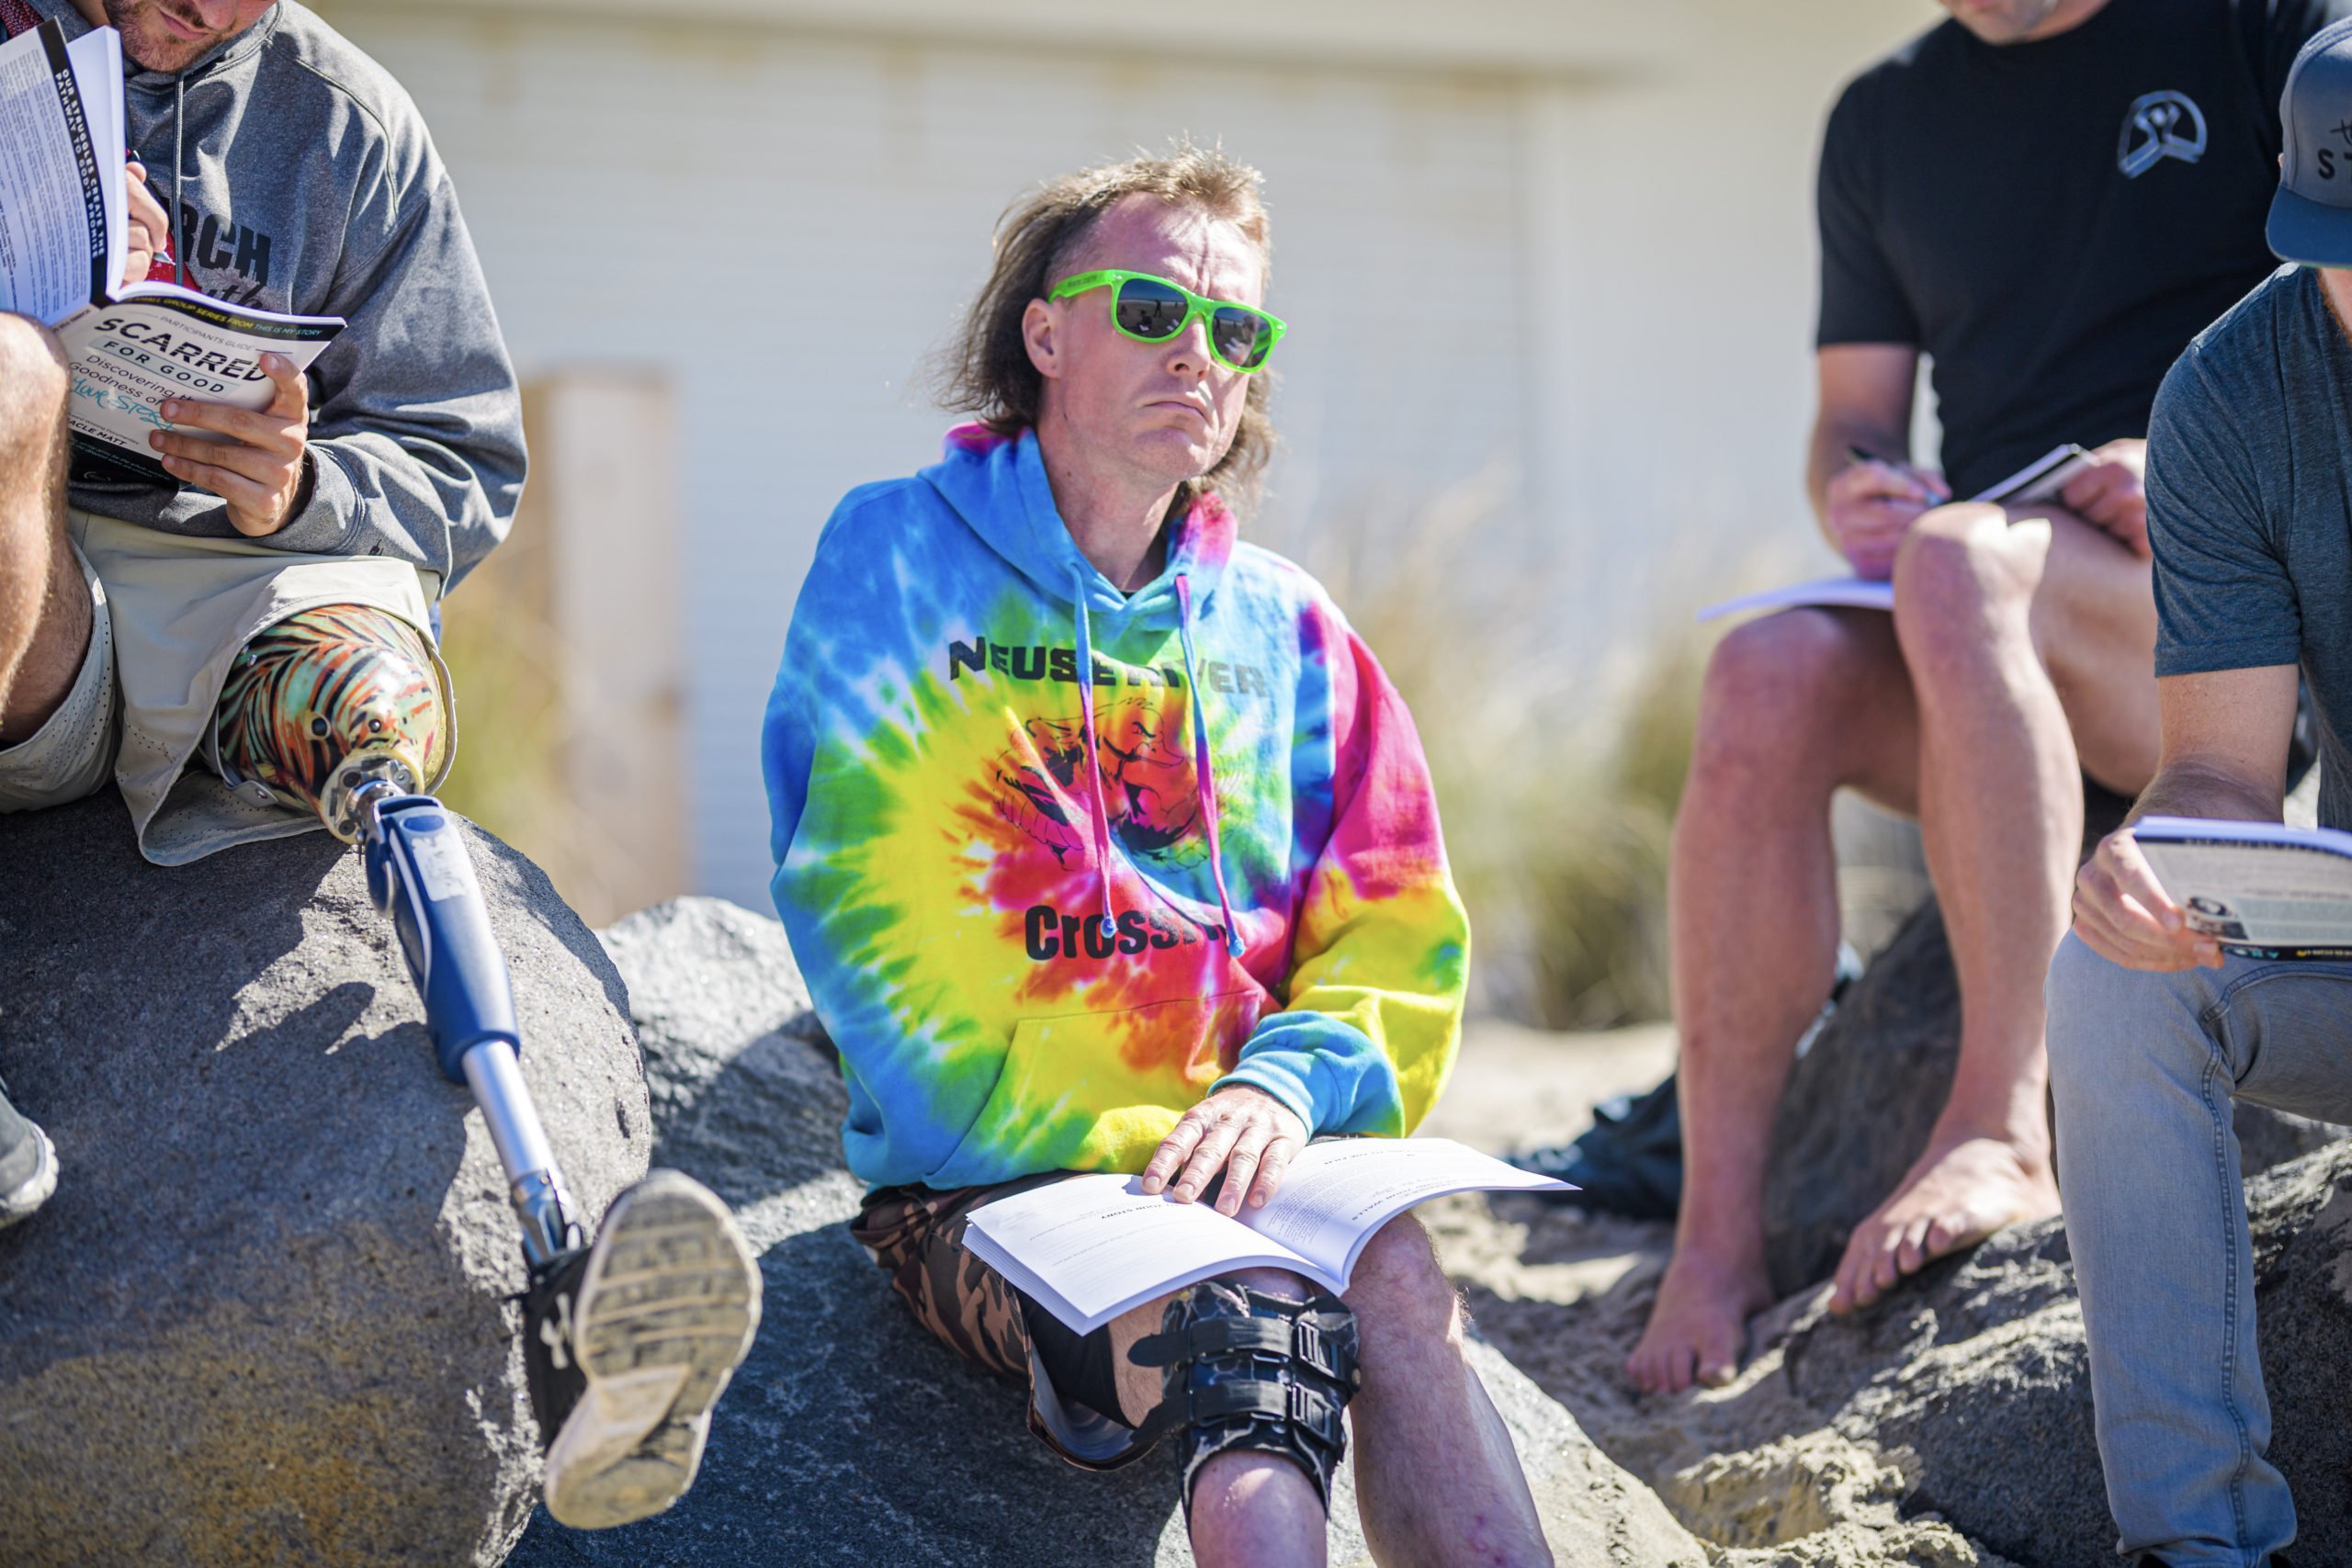 Shane pensively thinking while sitting on a rock at the beach with the other Forge men holding the devotional books they're working through during the group sessions.